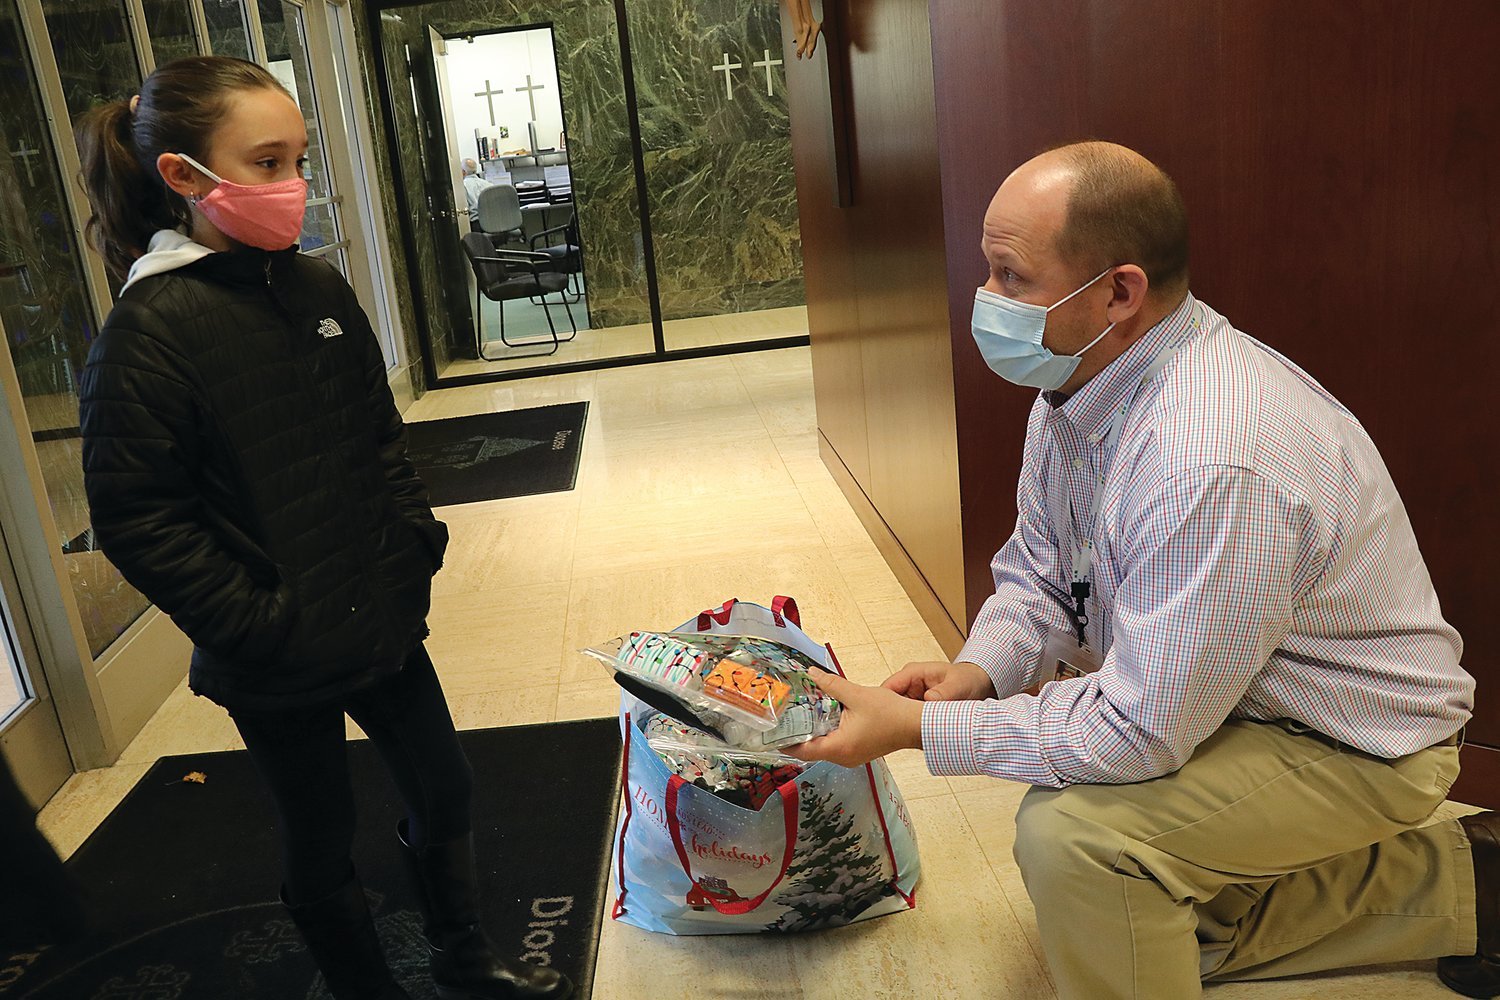 Mia RIcci, 9, presents gift bags that she prepared for guests staying at the diocesan Emmanuel House homeless shelter to James Jahnz, diocesan supervisor of Catholic Social Services, at the chancery.